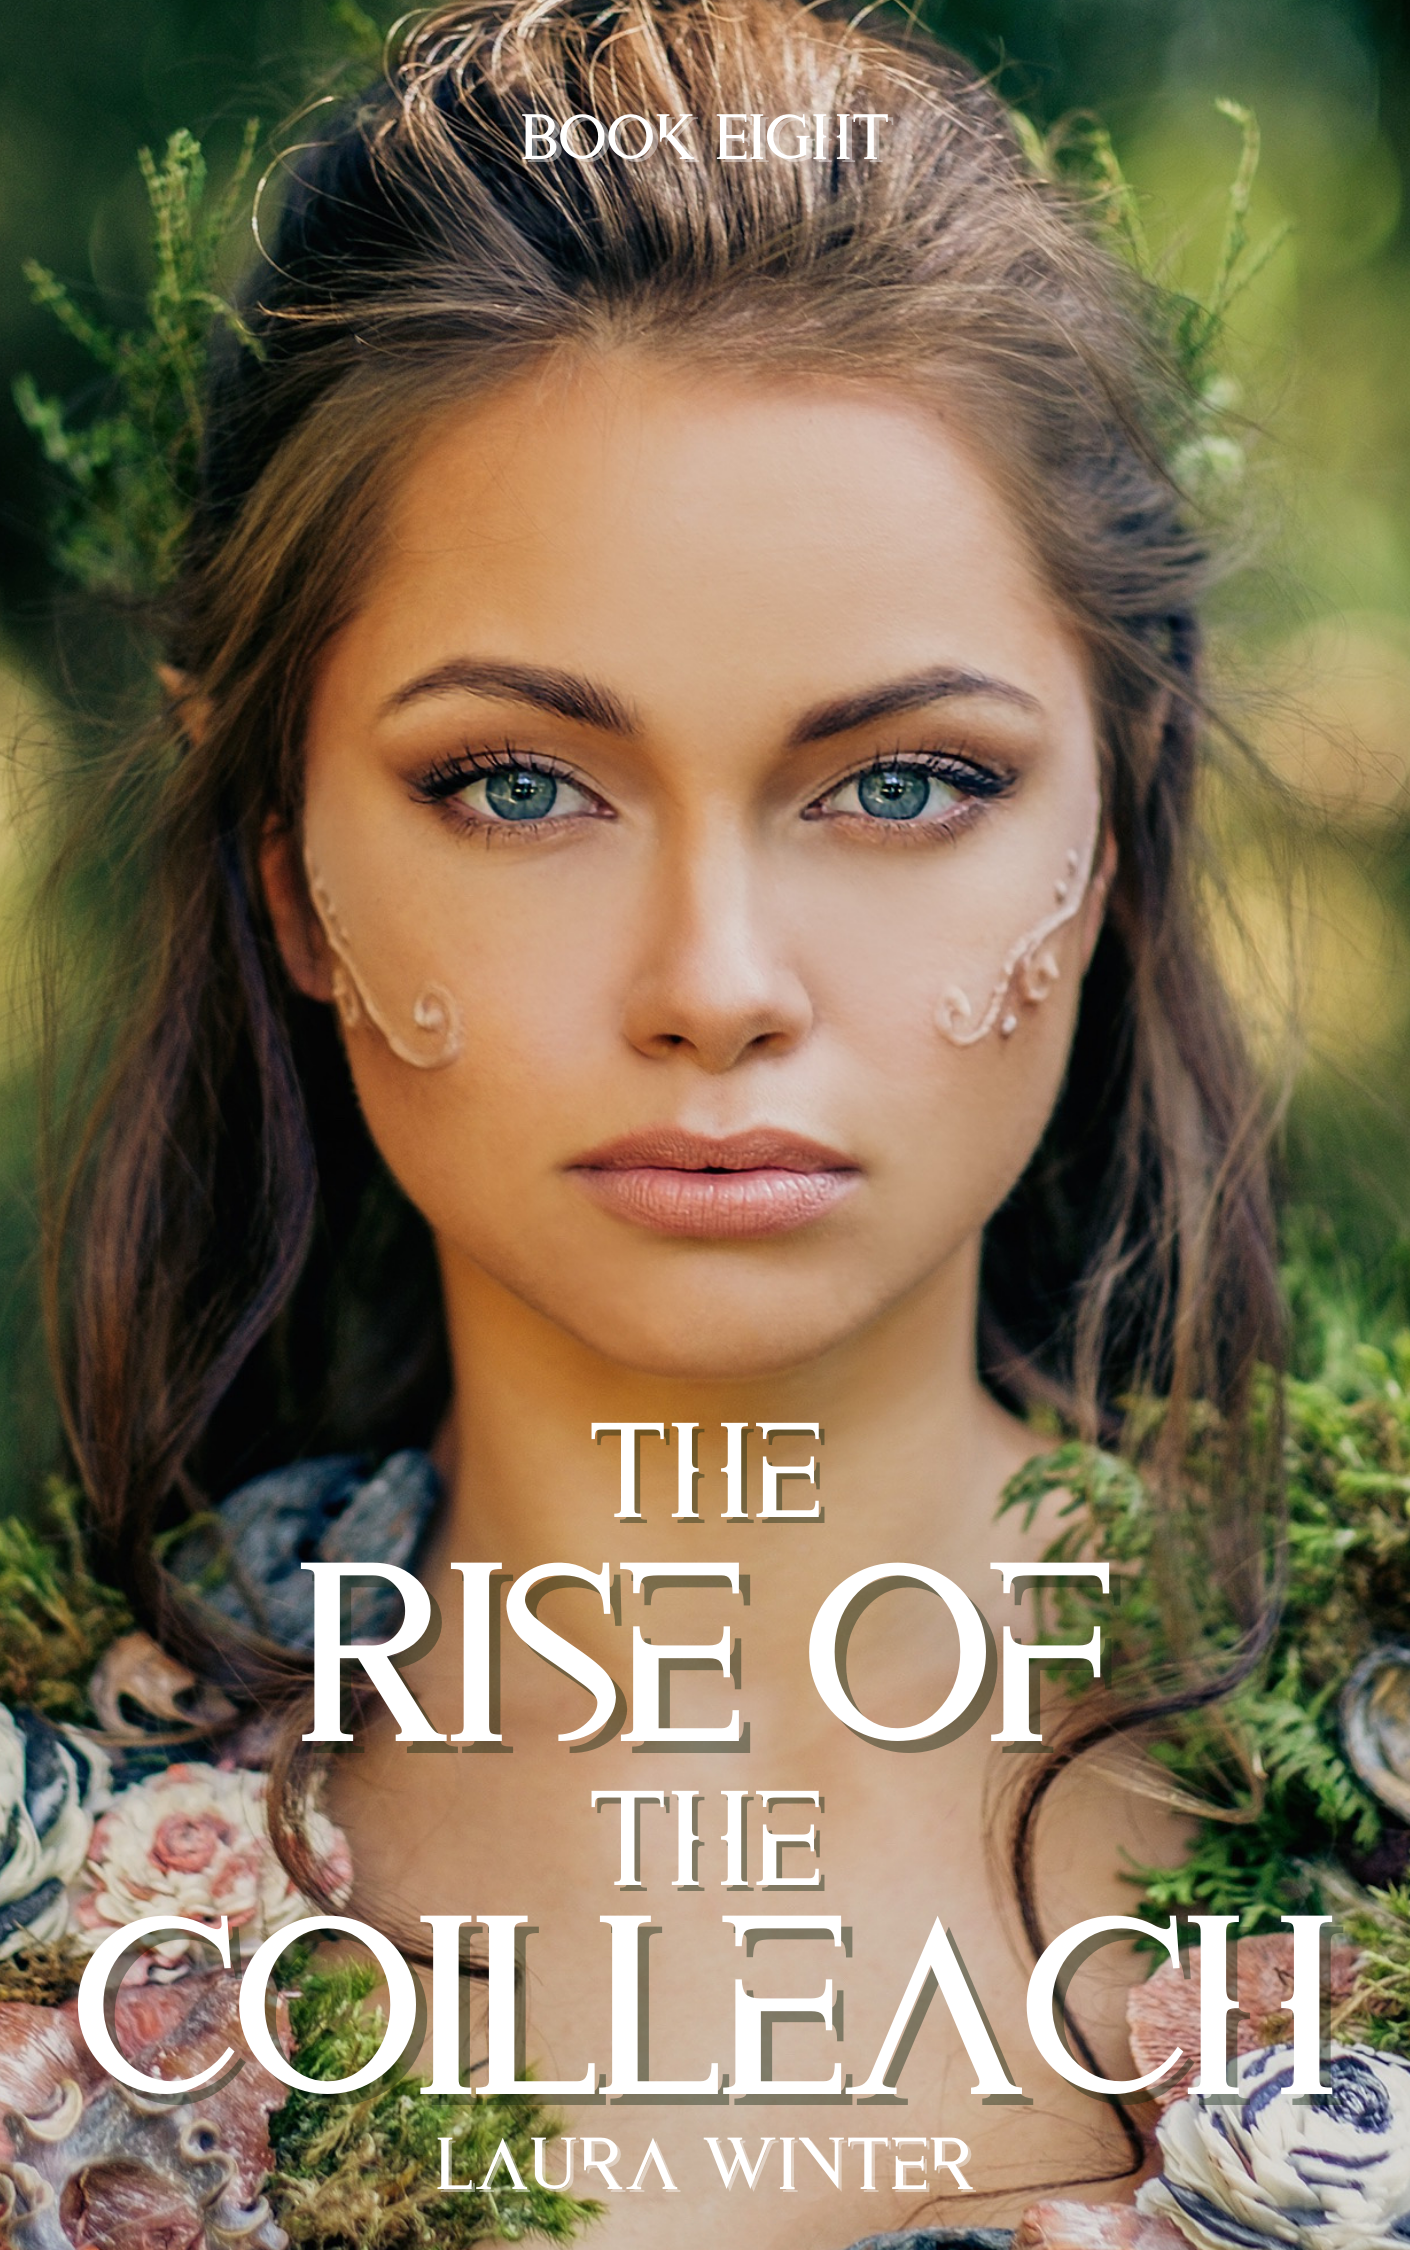 Copy of Copy of the rise of the coilleach book eight.png